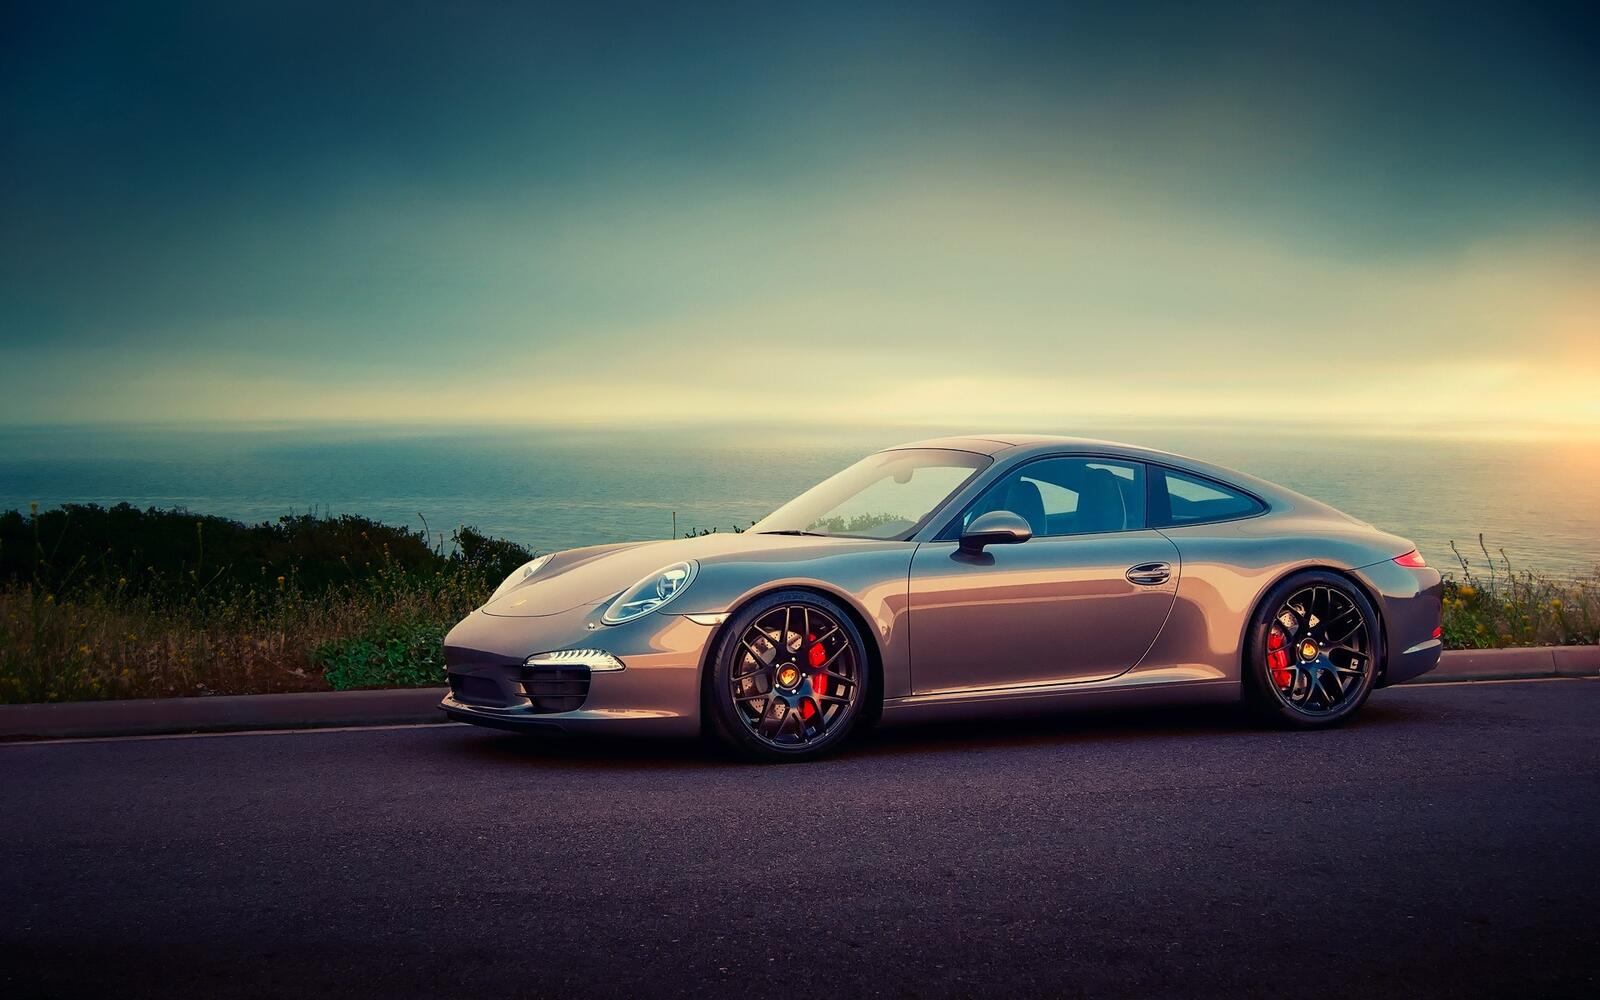 Free photo A gray Porsche 911 during sunset by the sea